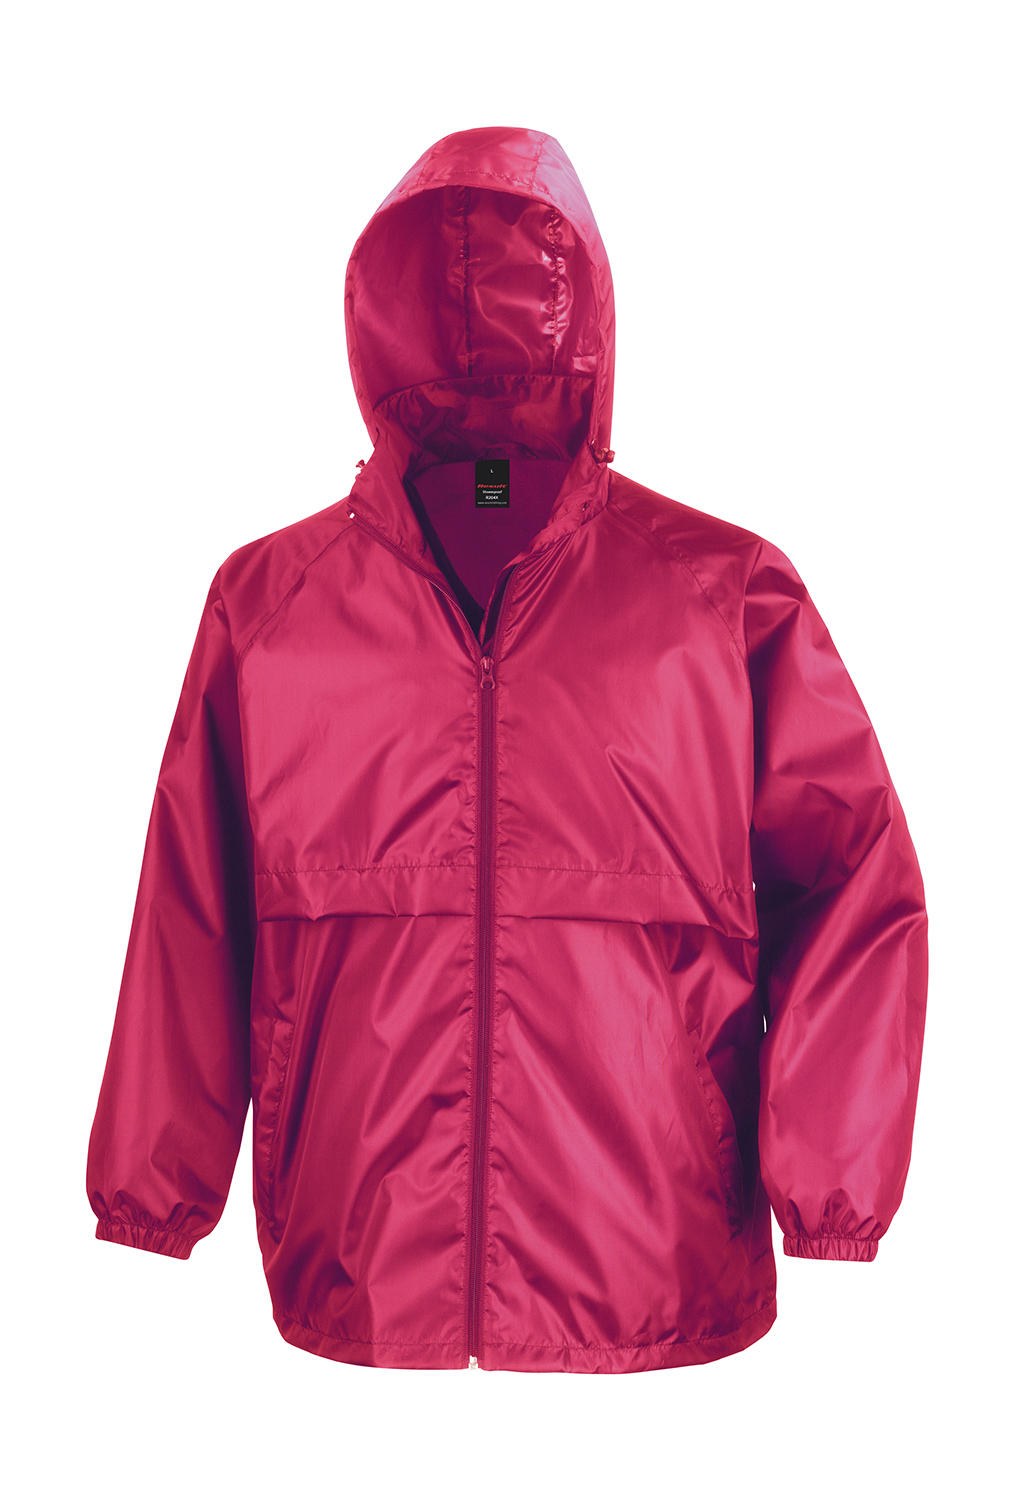  Core Adult Windcheater in Farbe Hot Pink